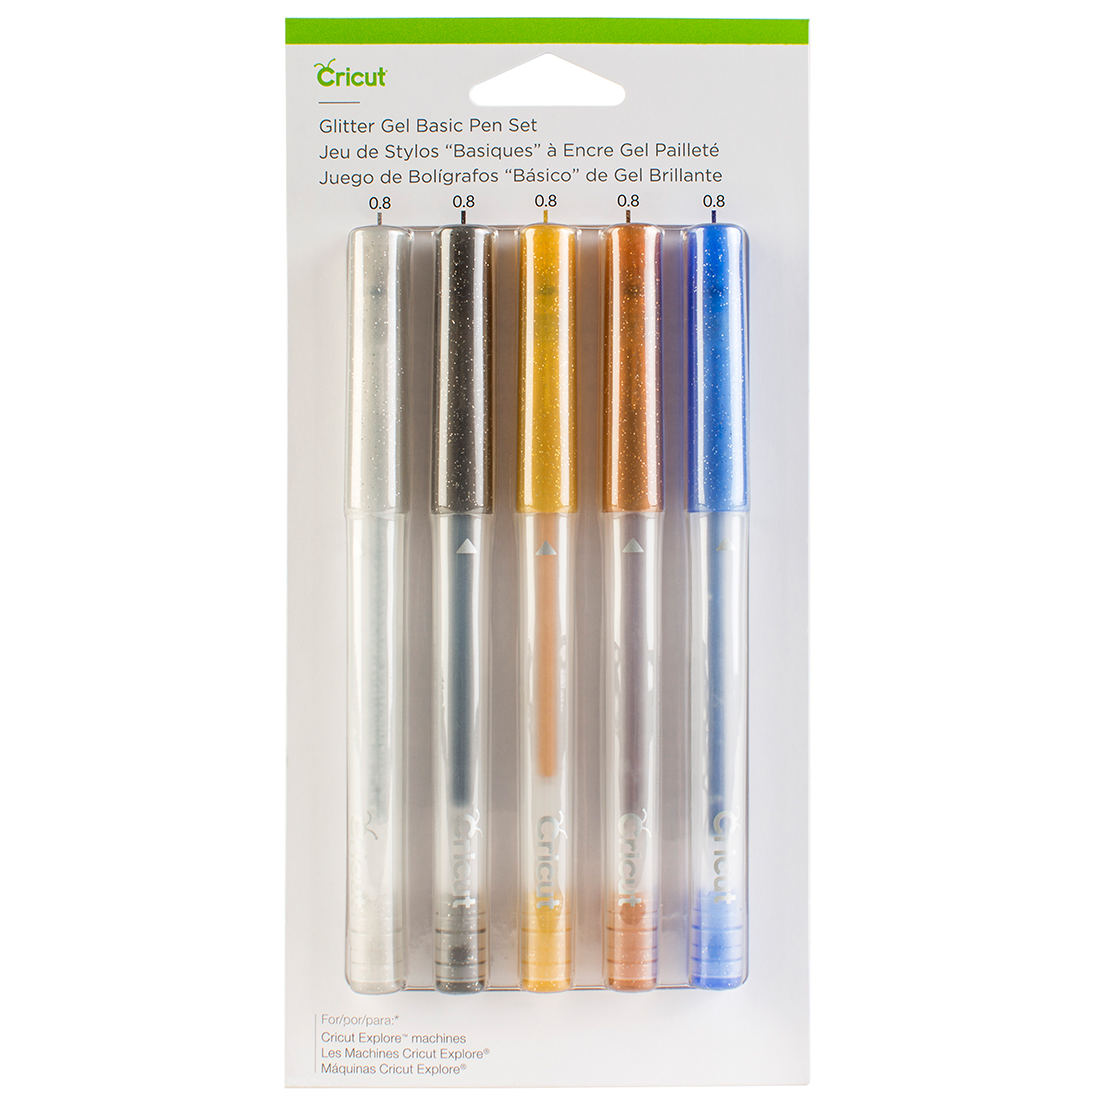  Welebar Glitter Gel Pen Set for Cricut Maker 3/Maker/Explore 3/Air  2/Air, 0.8 Tip Glitter Pen Set of 12 Pack Medium Point Pen, Writing,  Drawing, Invitations, Cards : Arts, Crafts & Sewing